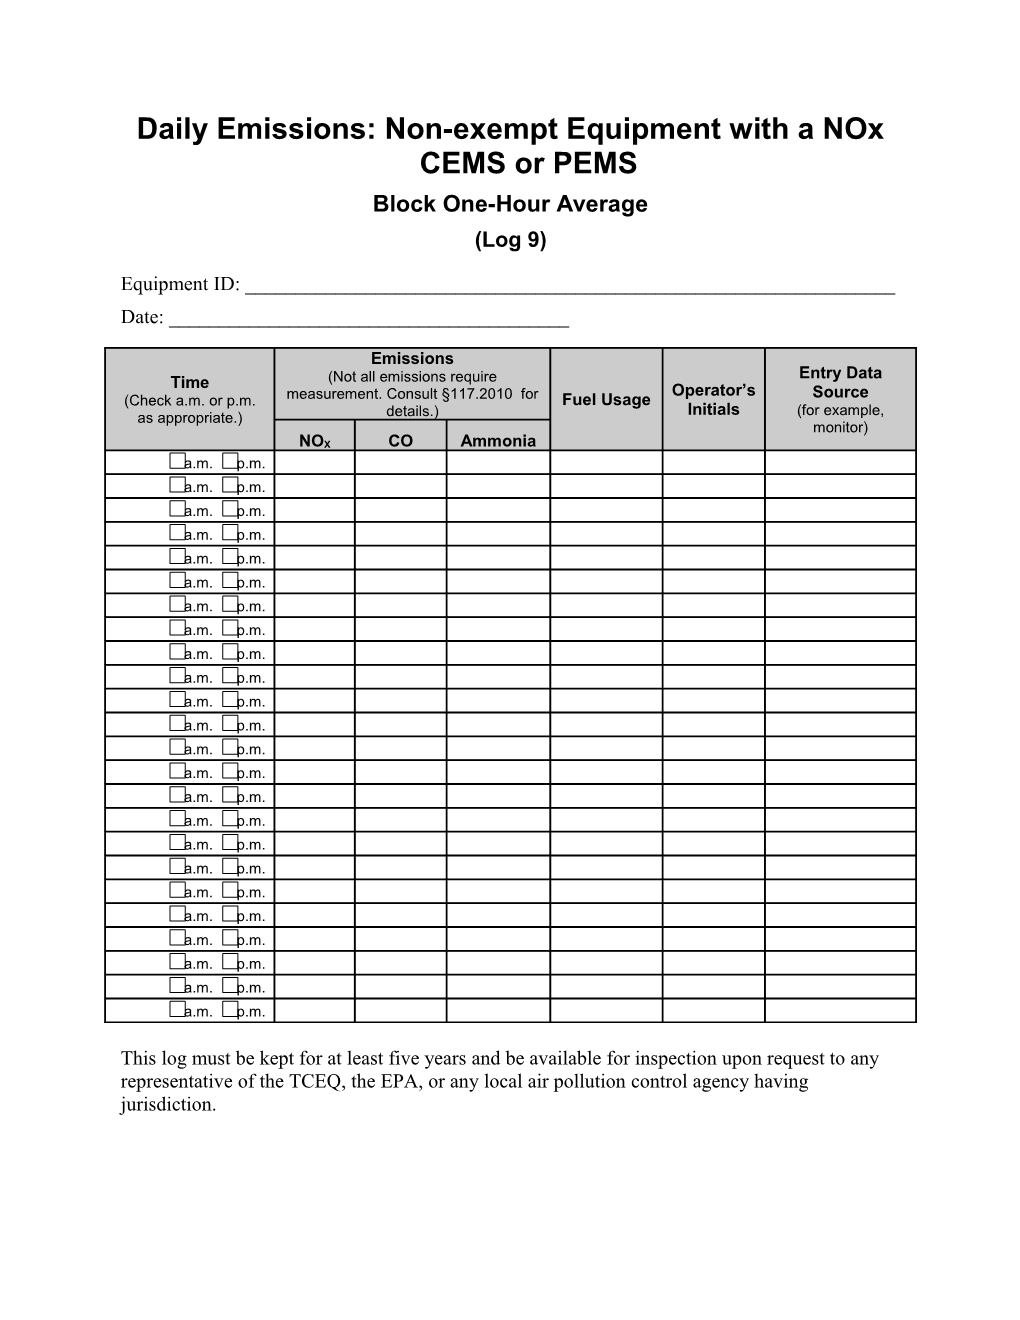 Emissions Log for Non-Exempt Equipment with a CEMS Or PEMS and Emission Limits Enforced